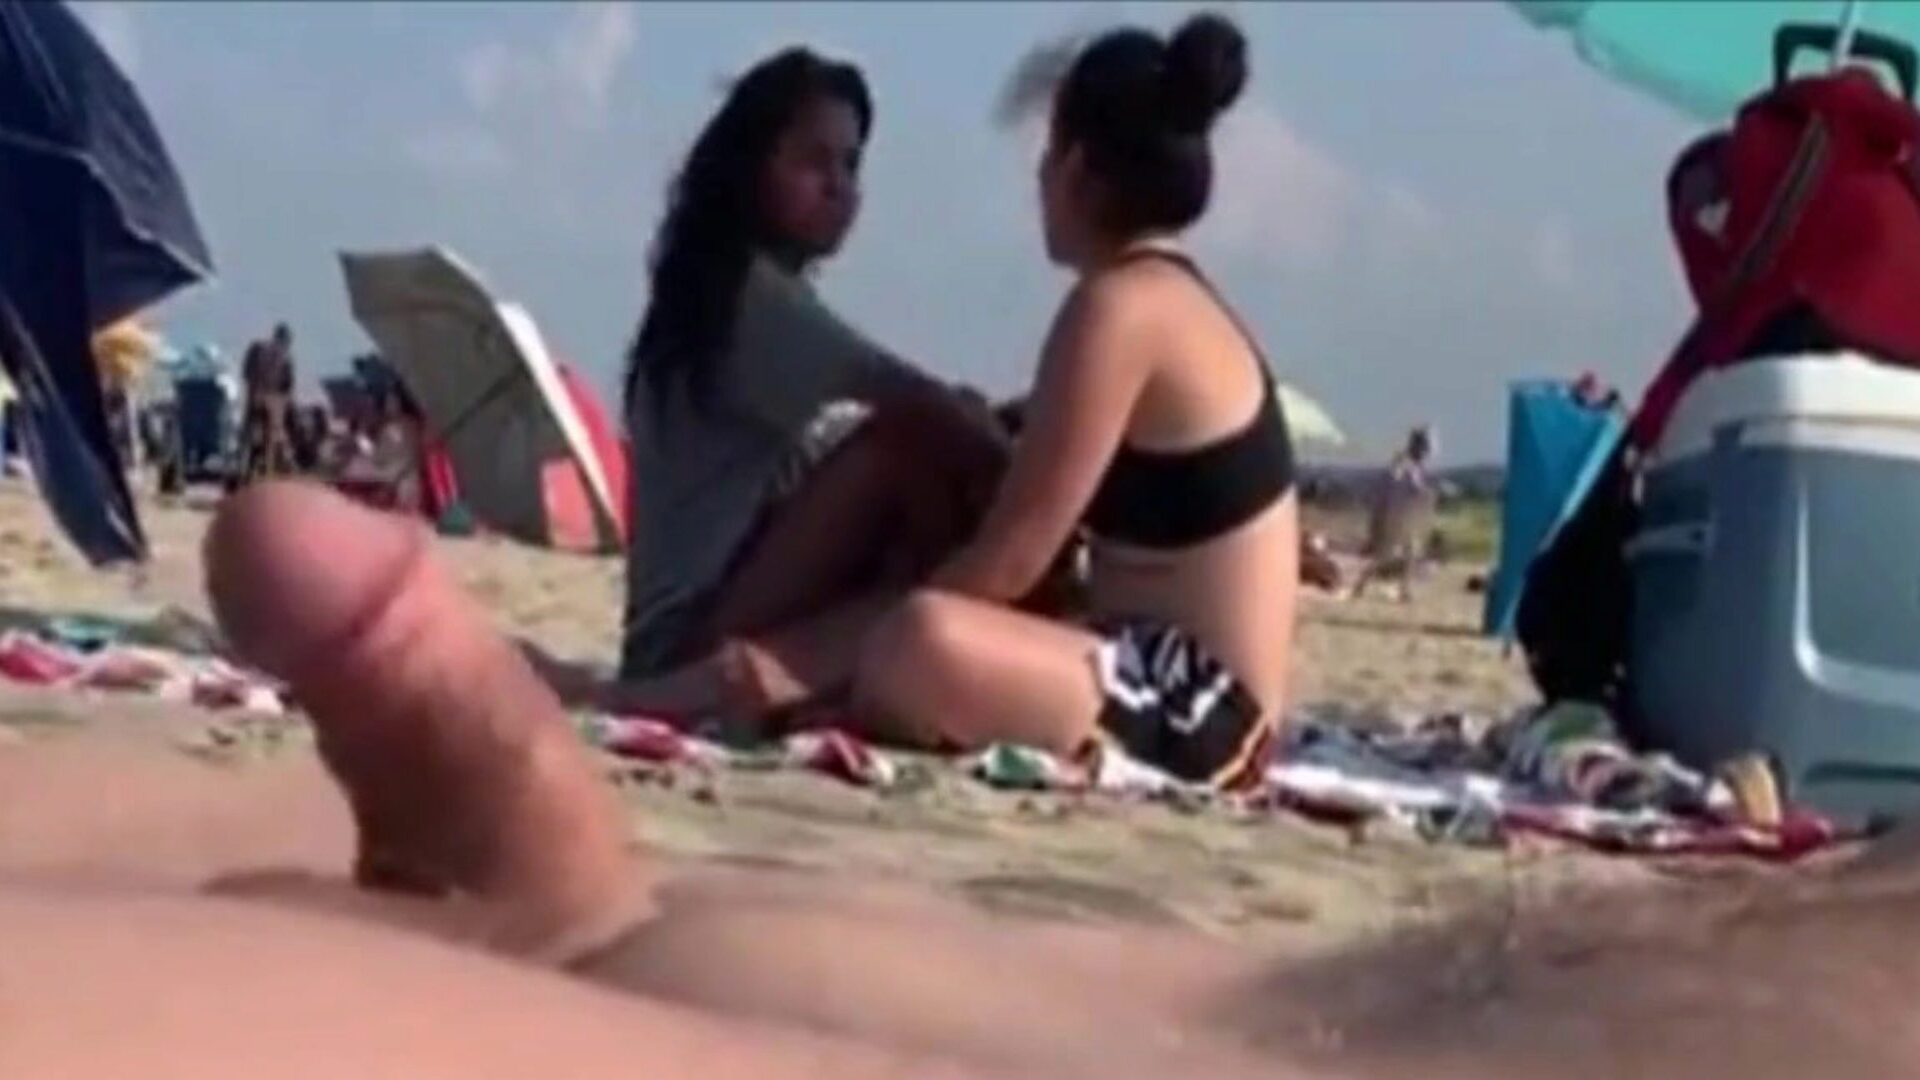 Two gals are observing my hard-on on a public beach Two beauties attending me to my wang let them go..